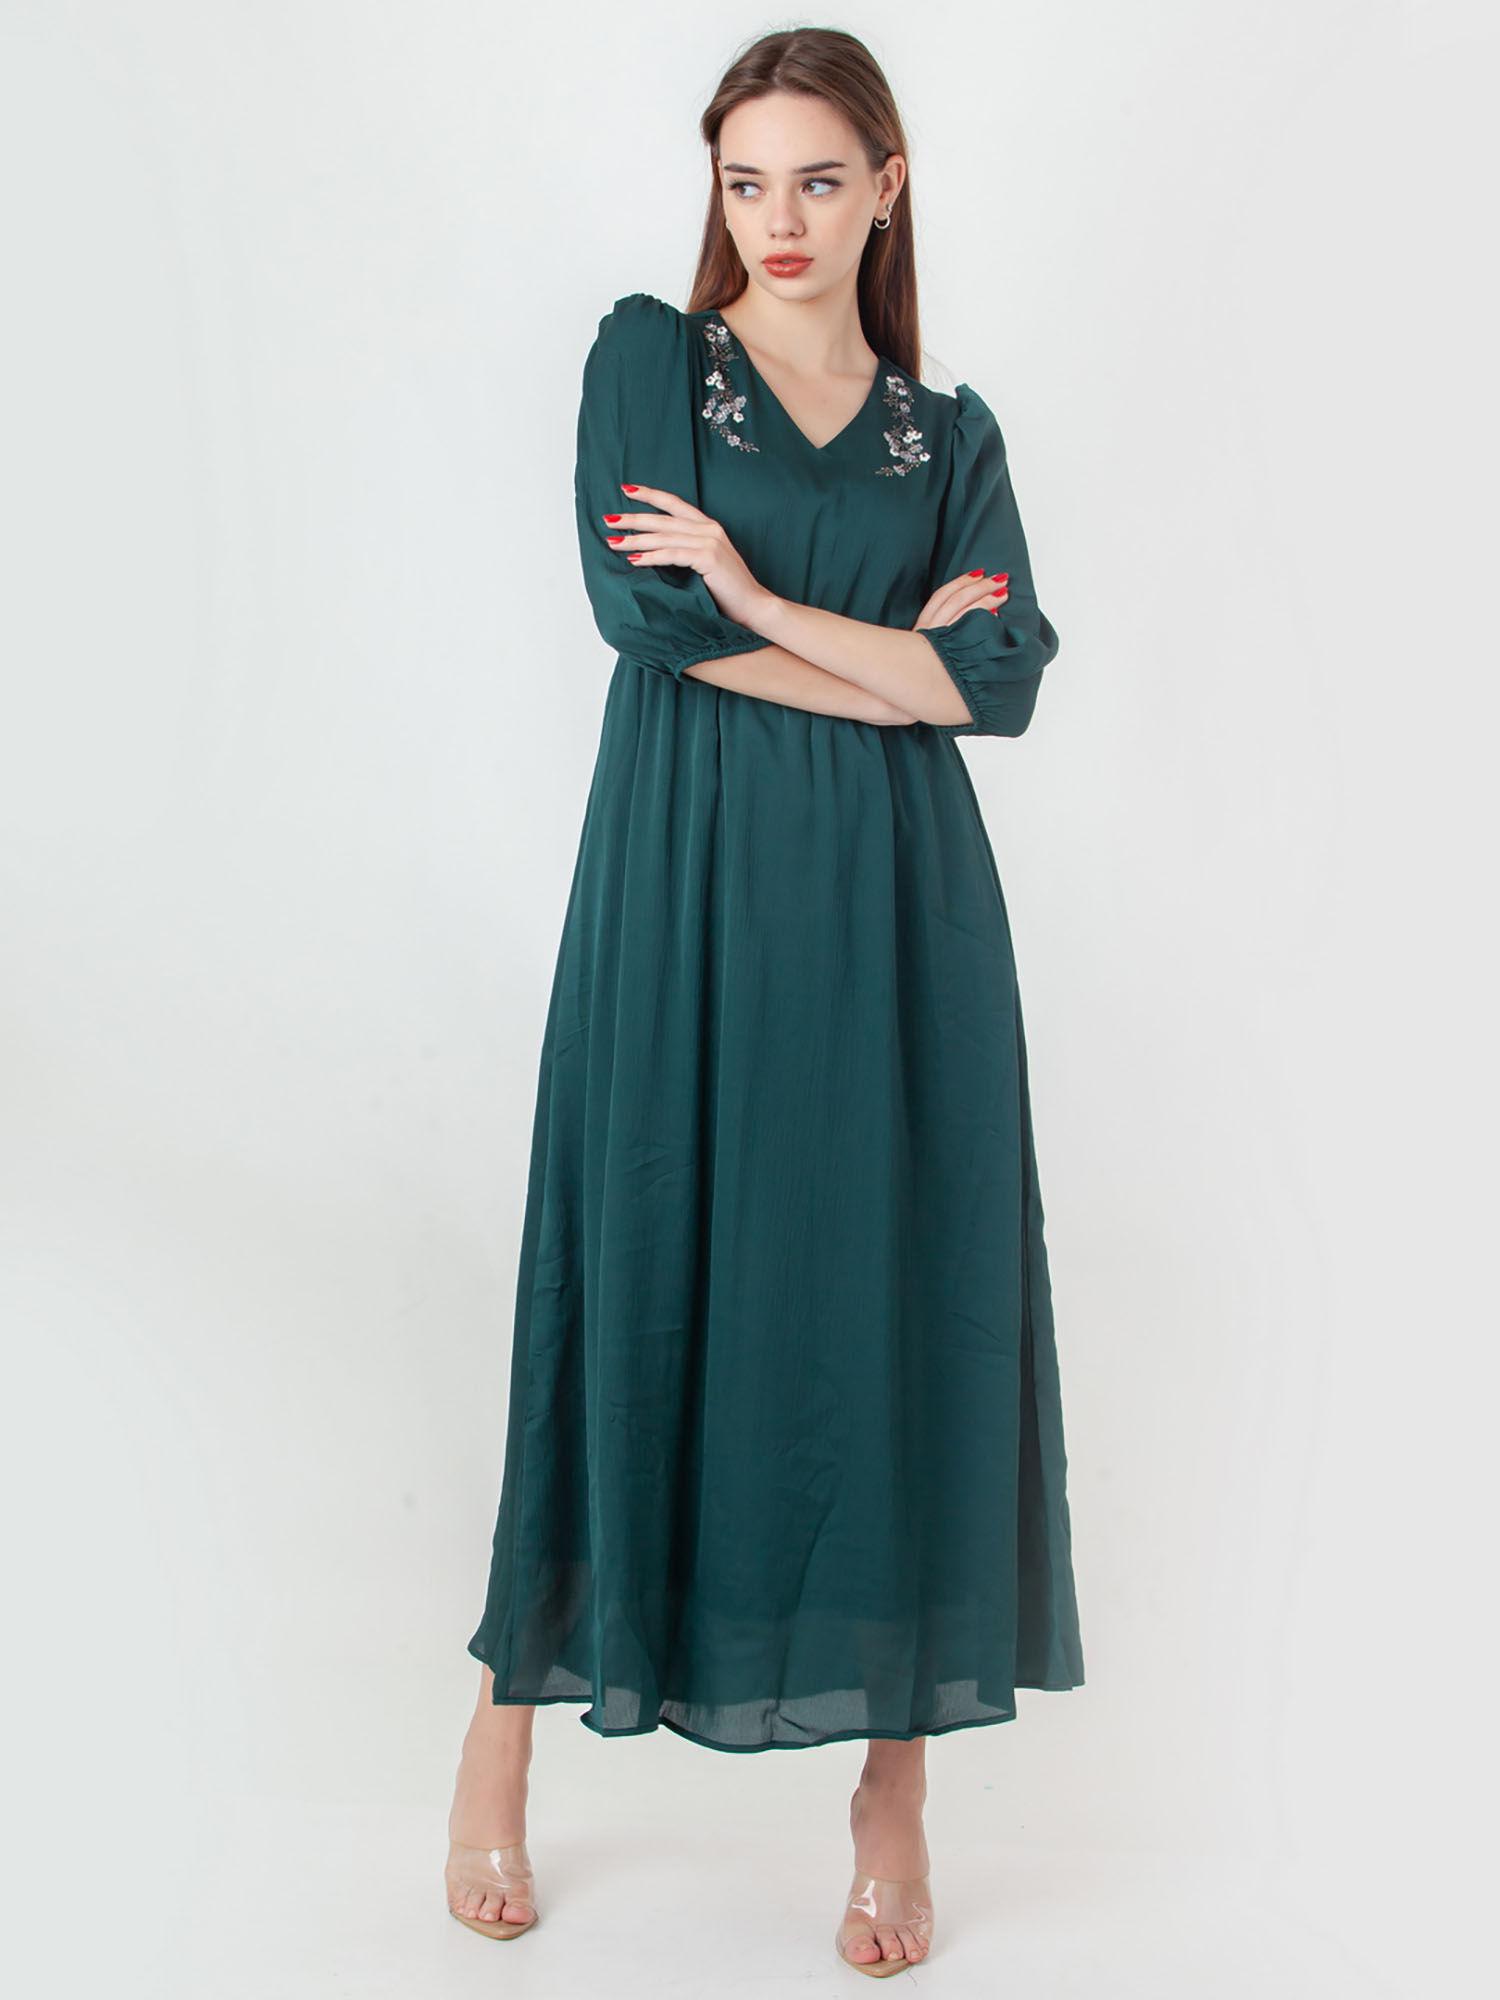 womens-teal-embroidered-maxi-dress